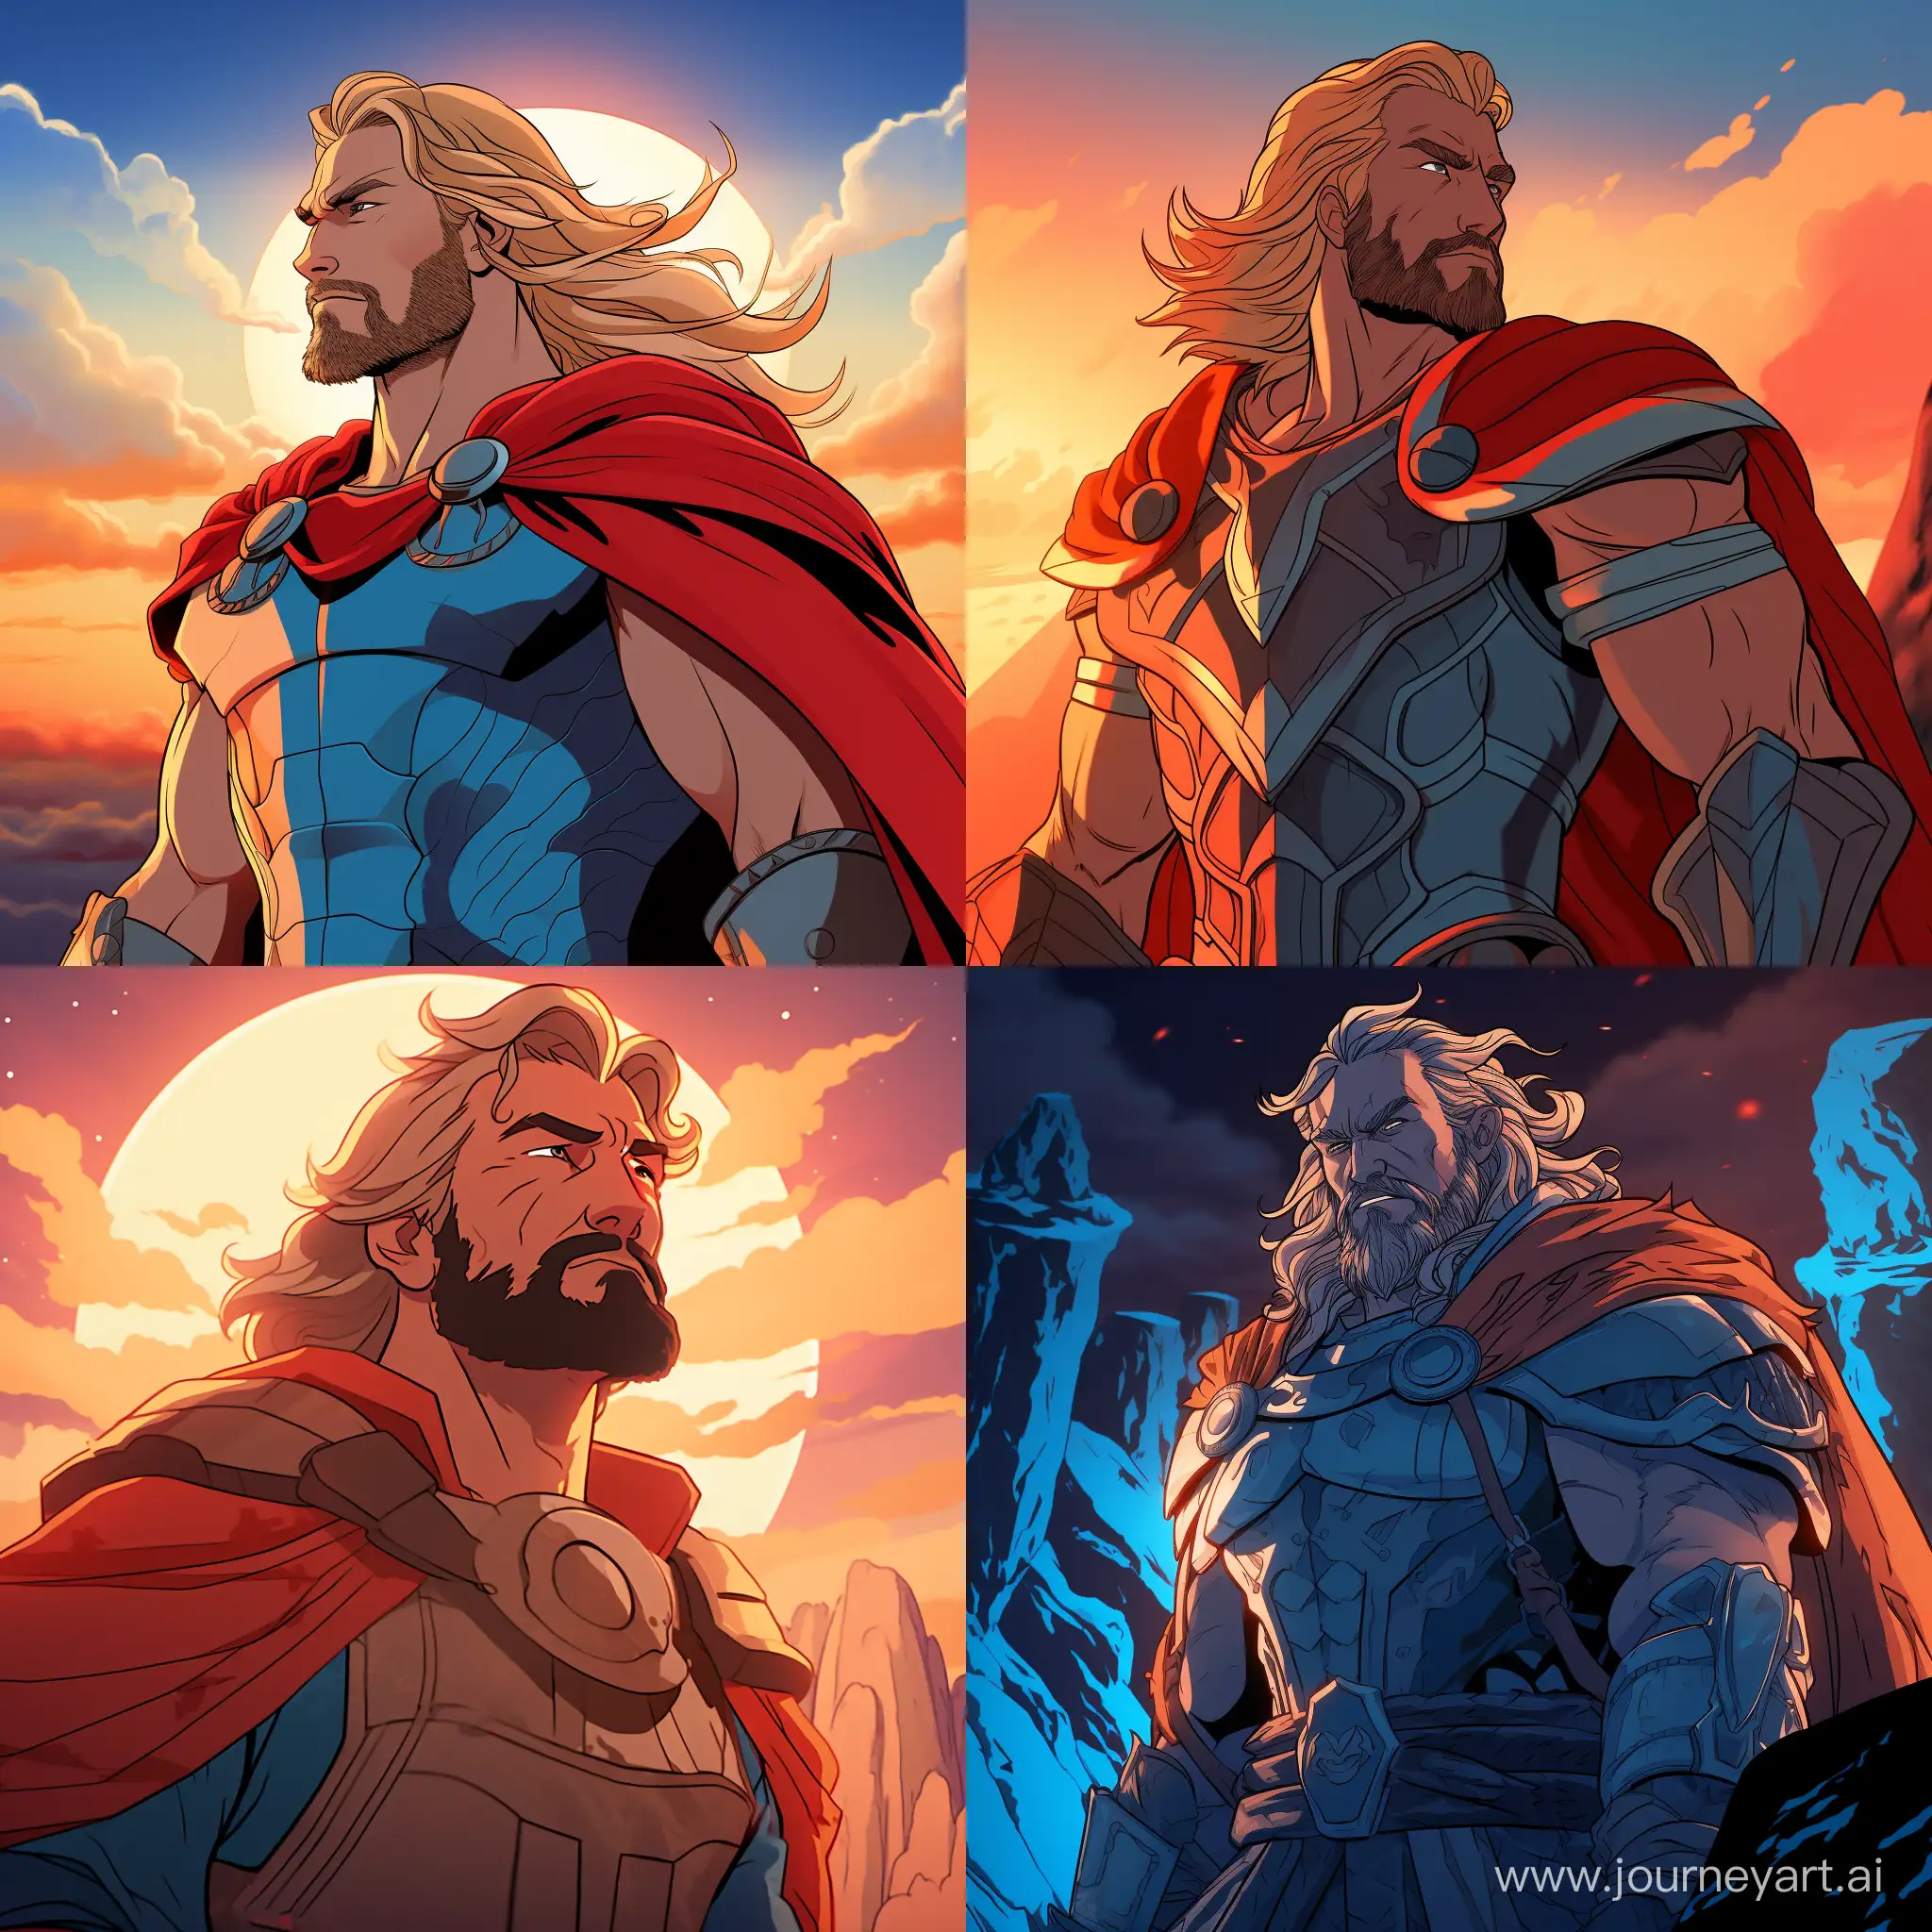 Thor-in-Dynamic-Cel-Shading-Animation-Style